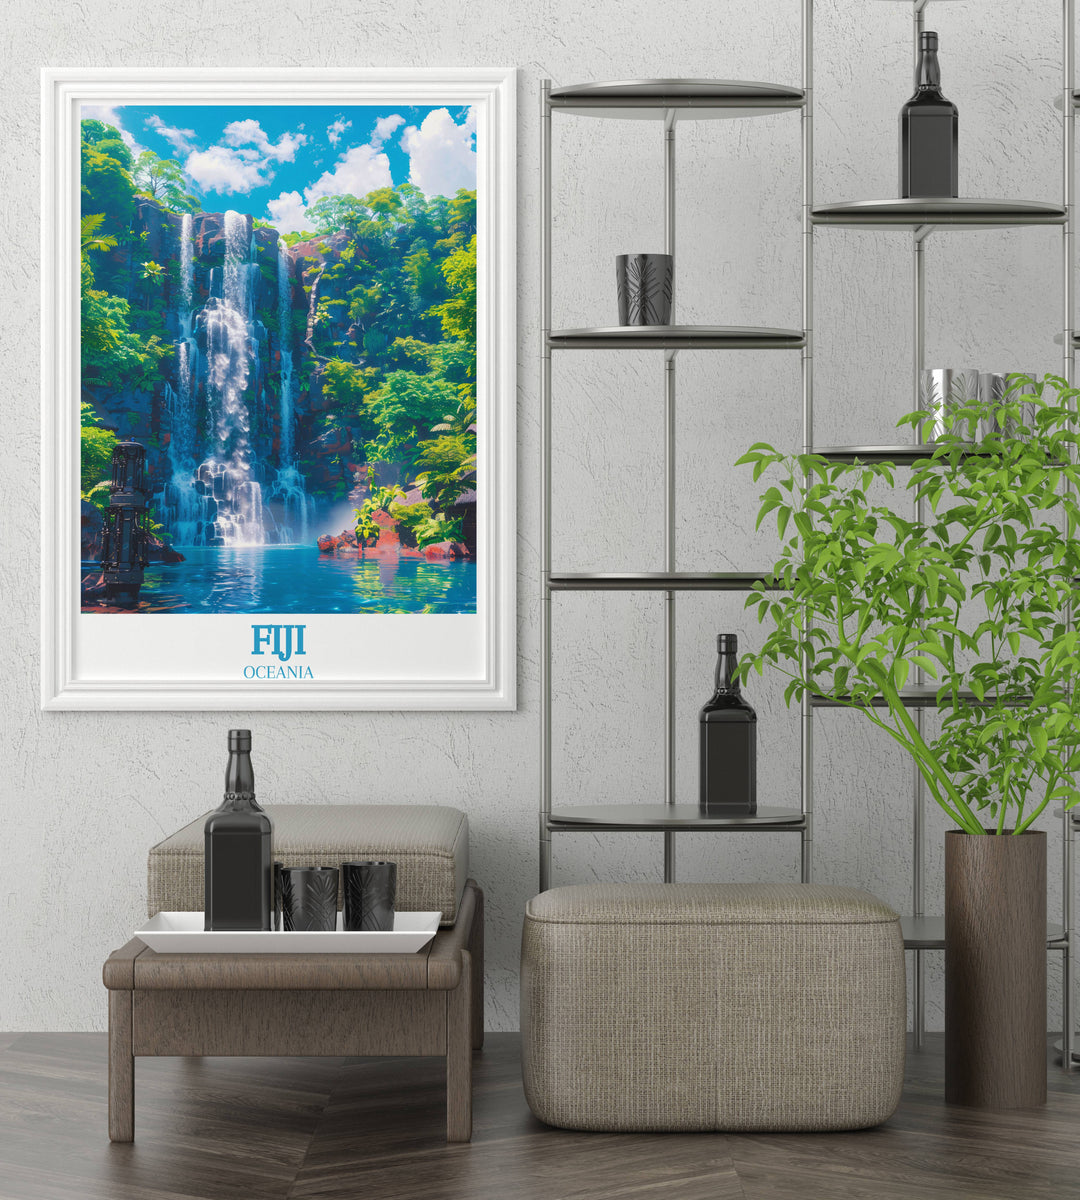 Bring the Tranquility of Tavoro Falls Into Your Home with Our Exclusive Fiji Wall Art and Minimal Travel Prints